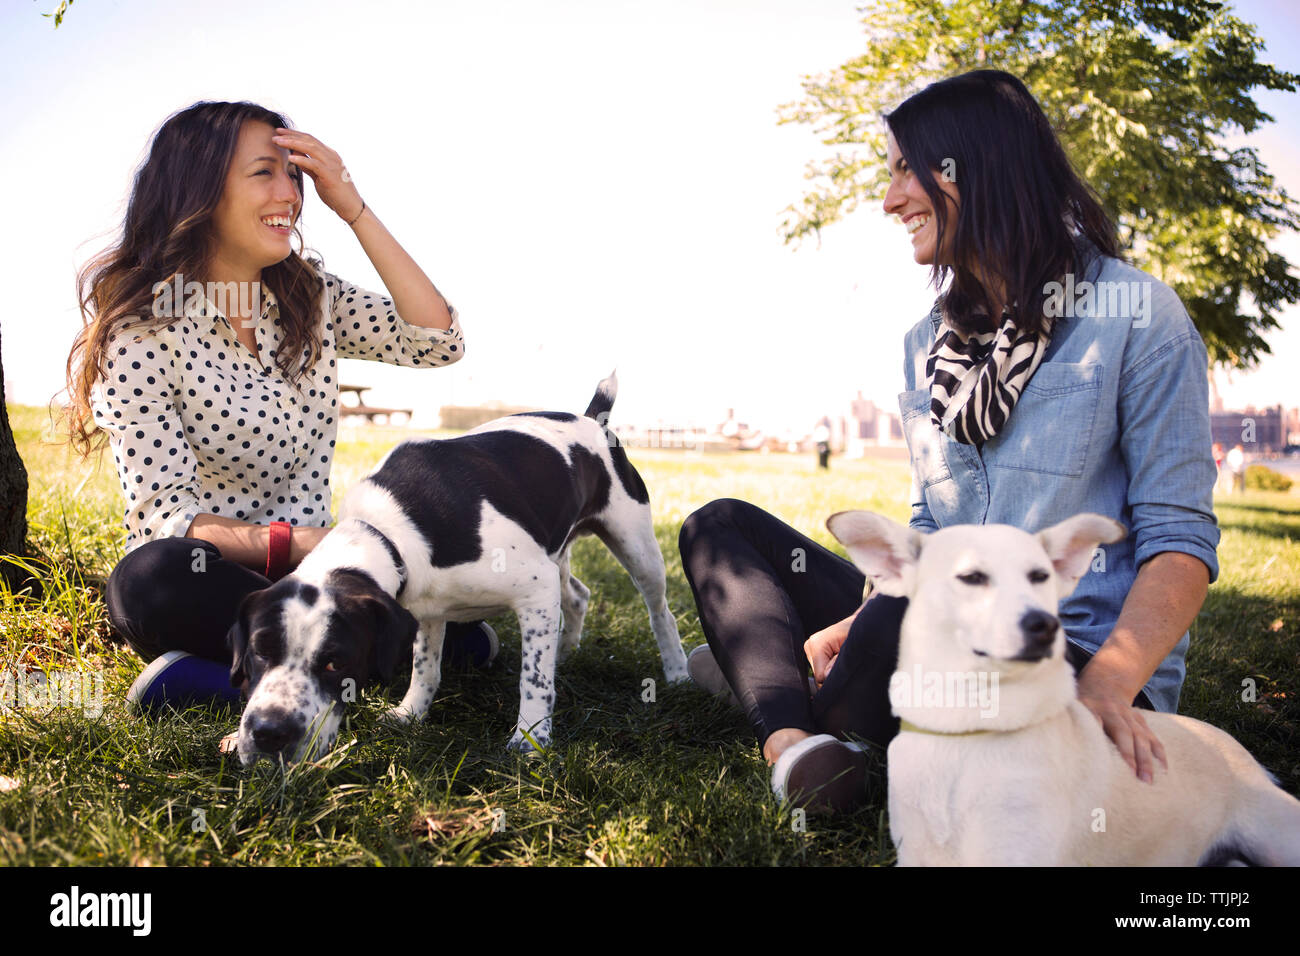 Happy women with dogs talking while resting on grassy field at park against clear sky Stock Photo